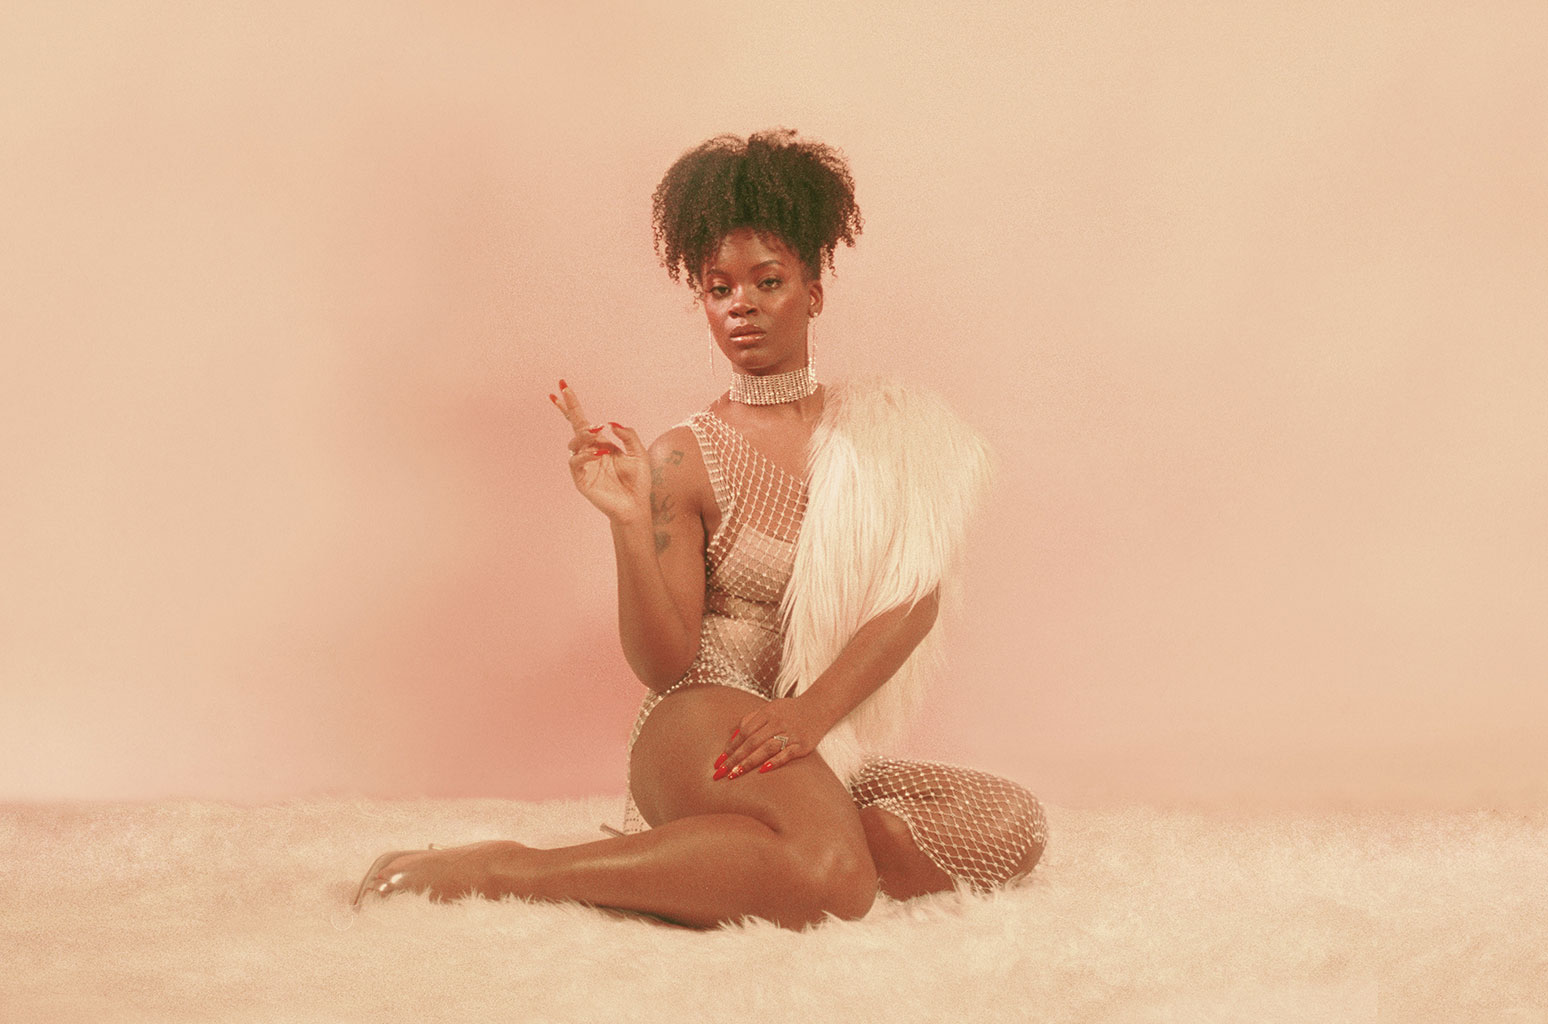 Ari Lennox Releases New Track "Up Late" From LP Shea Butter Baby ...